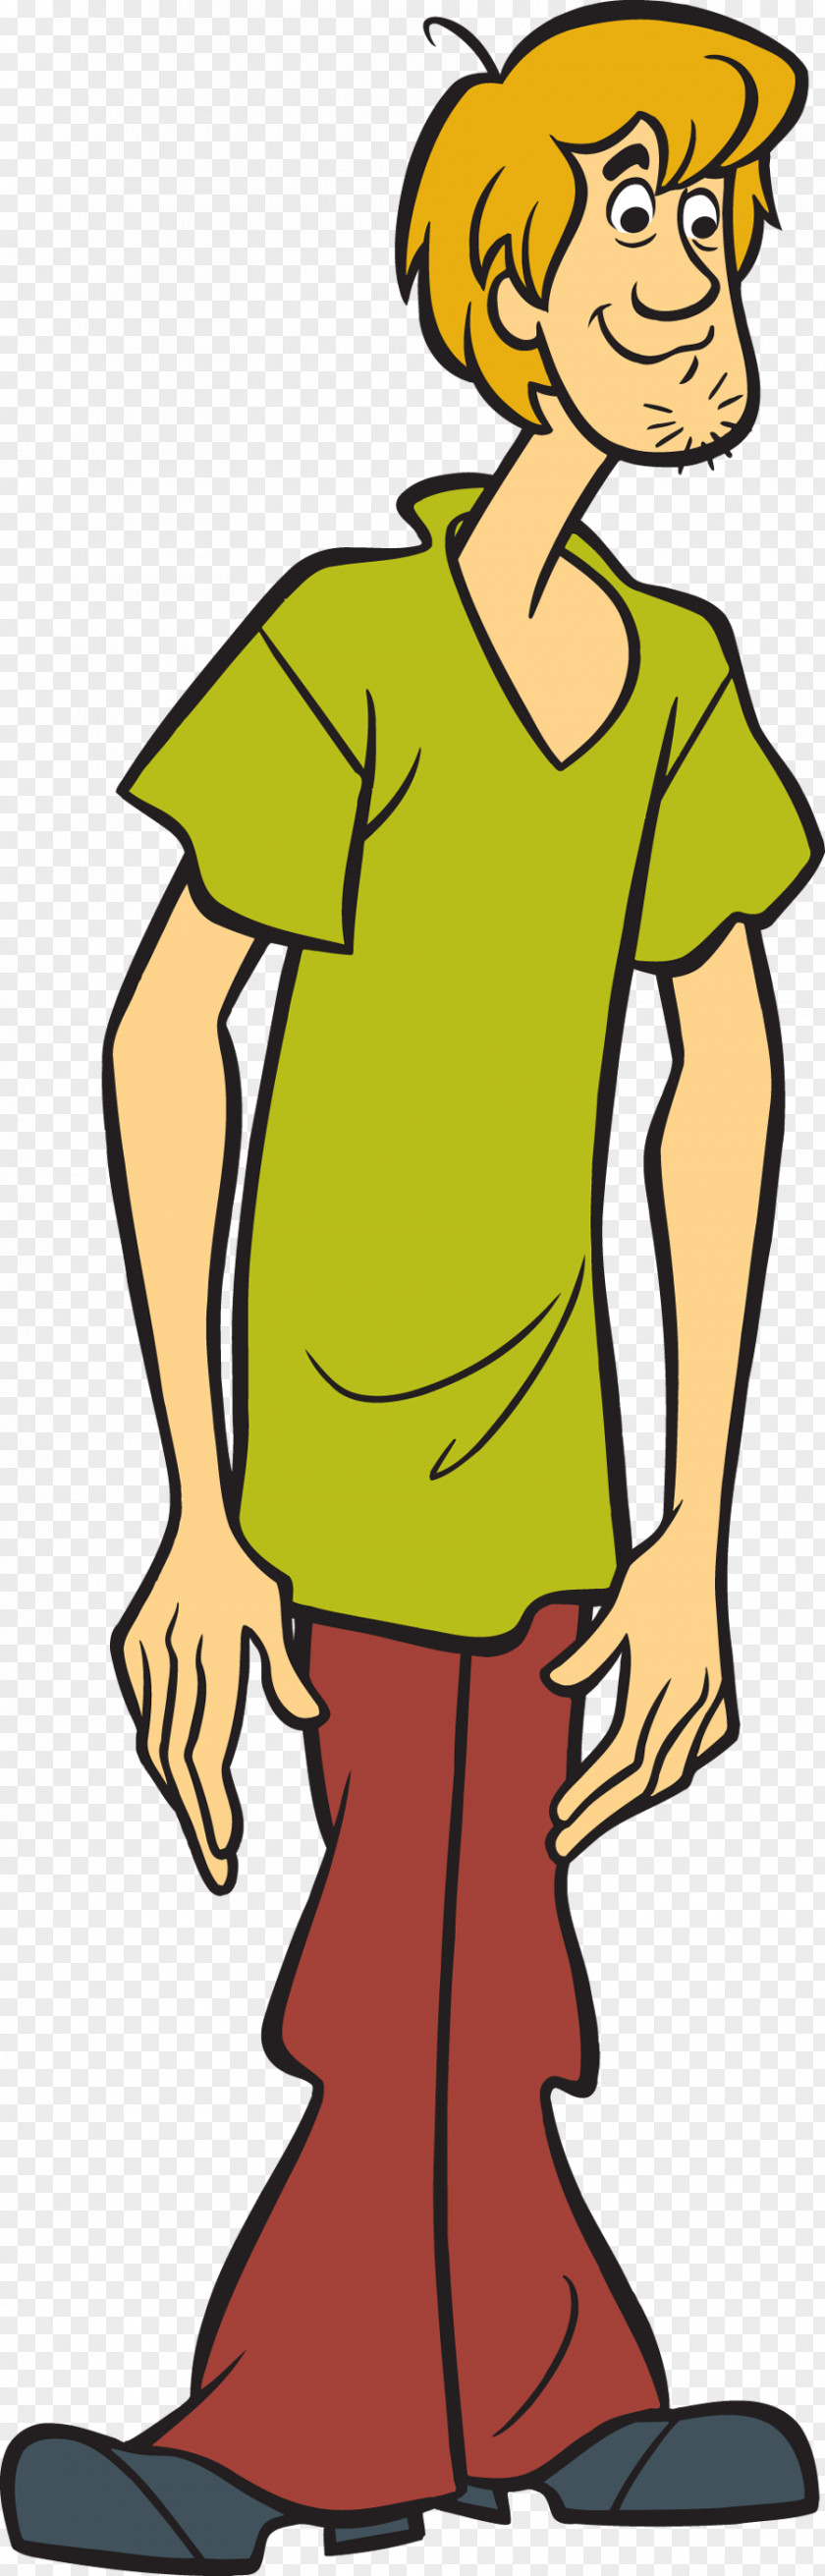 Shaggy Rogers Velma Dinkley Daphne Blake Fred Jones Scooby Doo PNG Doo, mr. bean, Scooby-Doo illustration clipart PNG